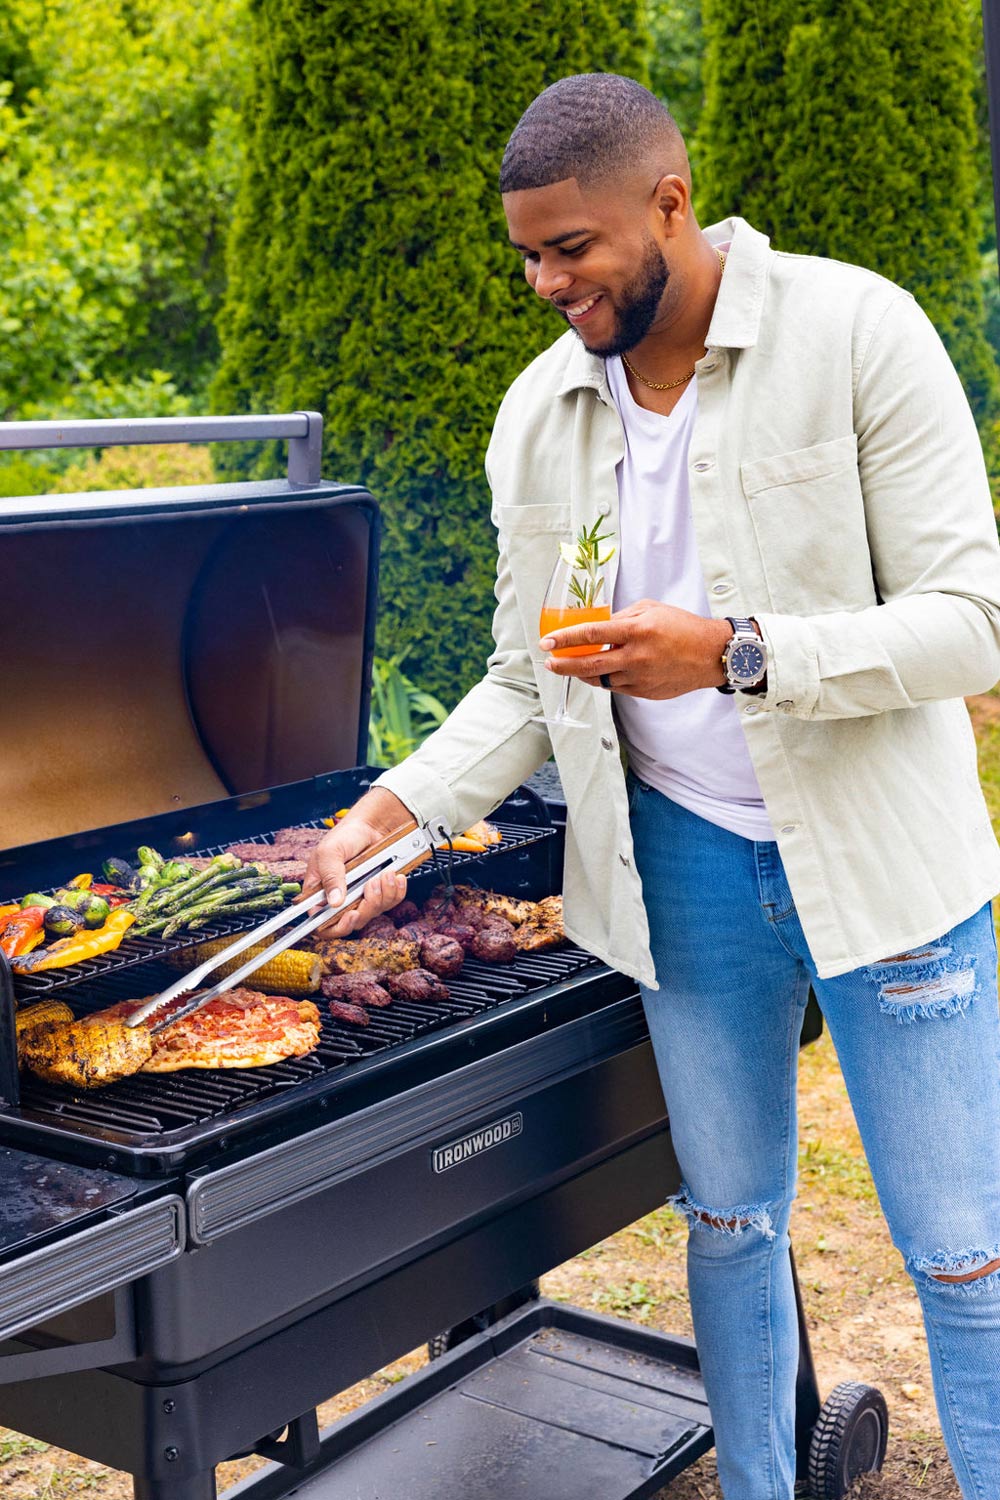 A man grilling food while holding a mocktail.